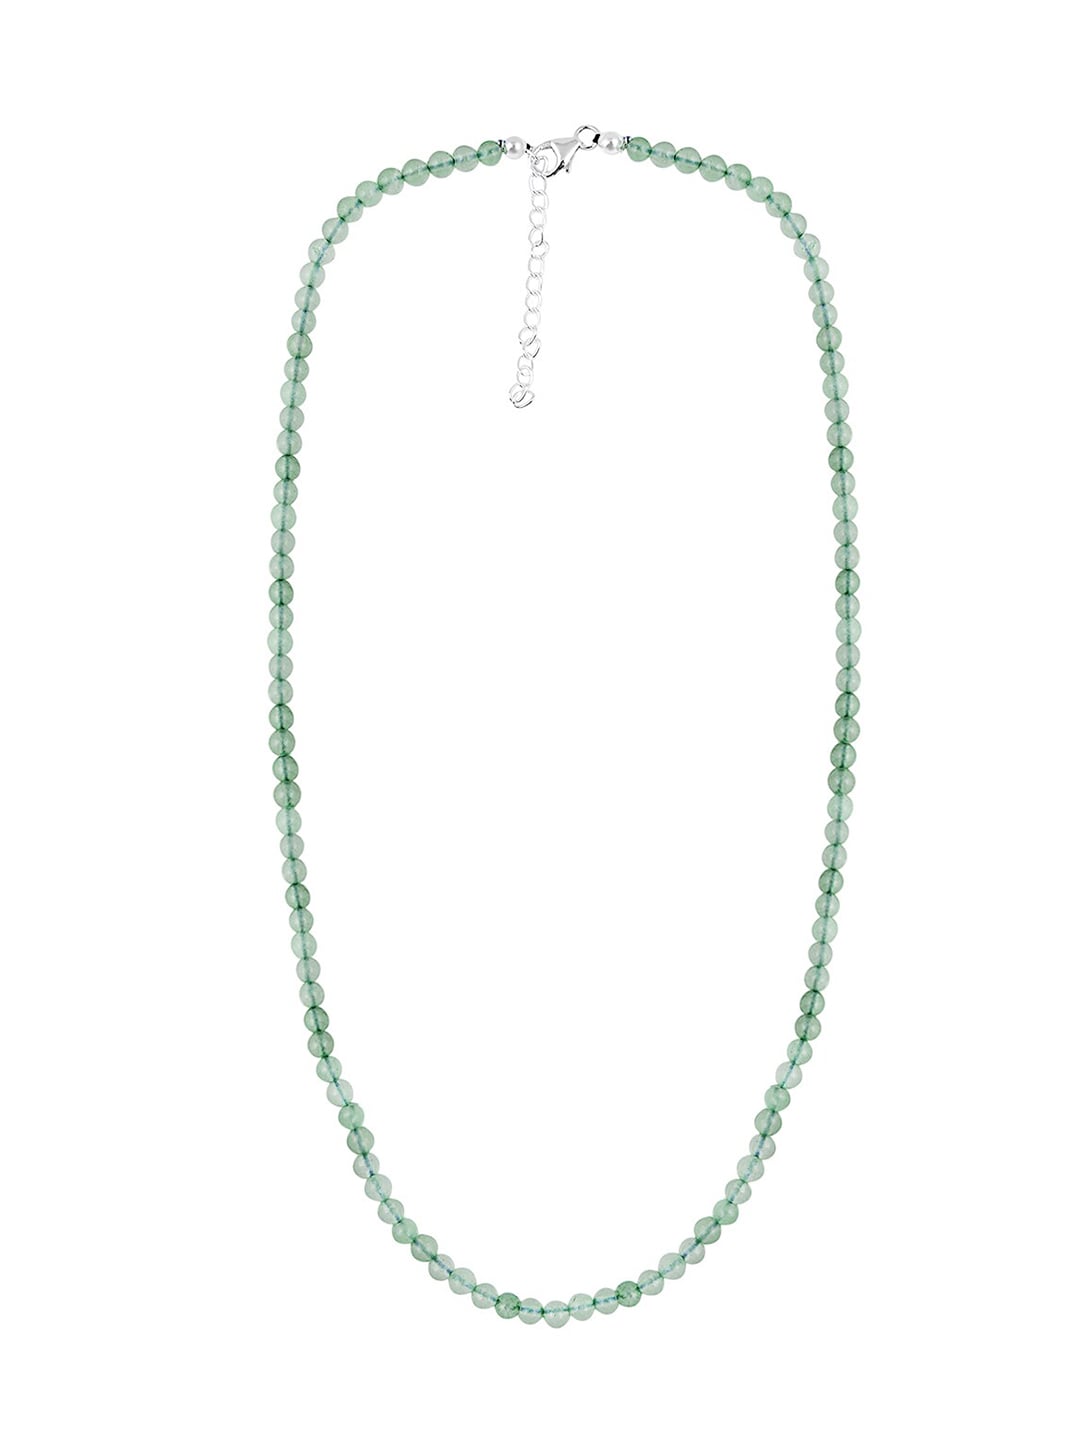 LA SOULA Green Sterling Silver Handcrafted Necklace Price in India